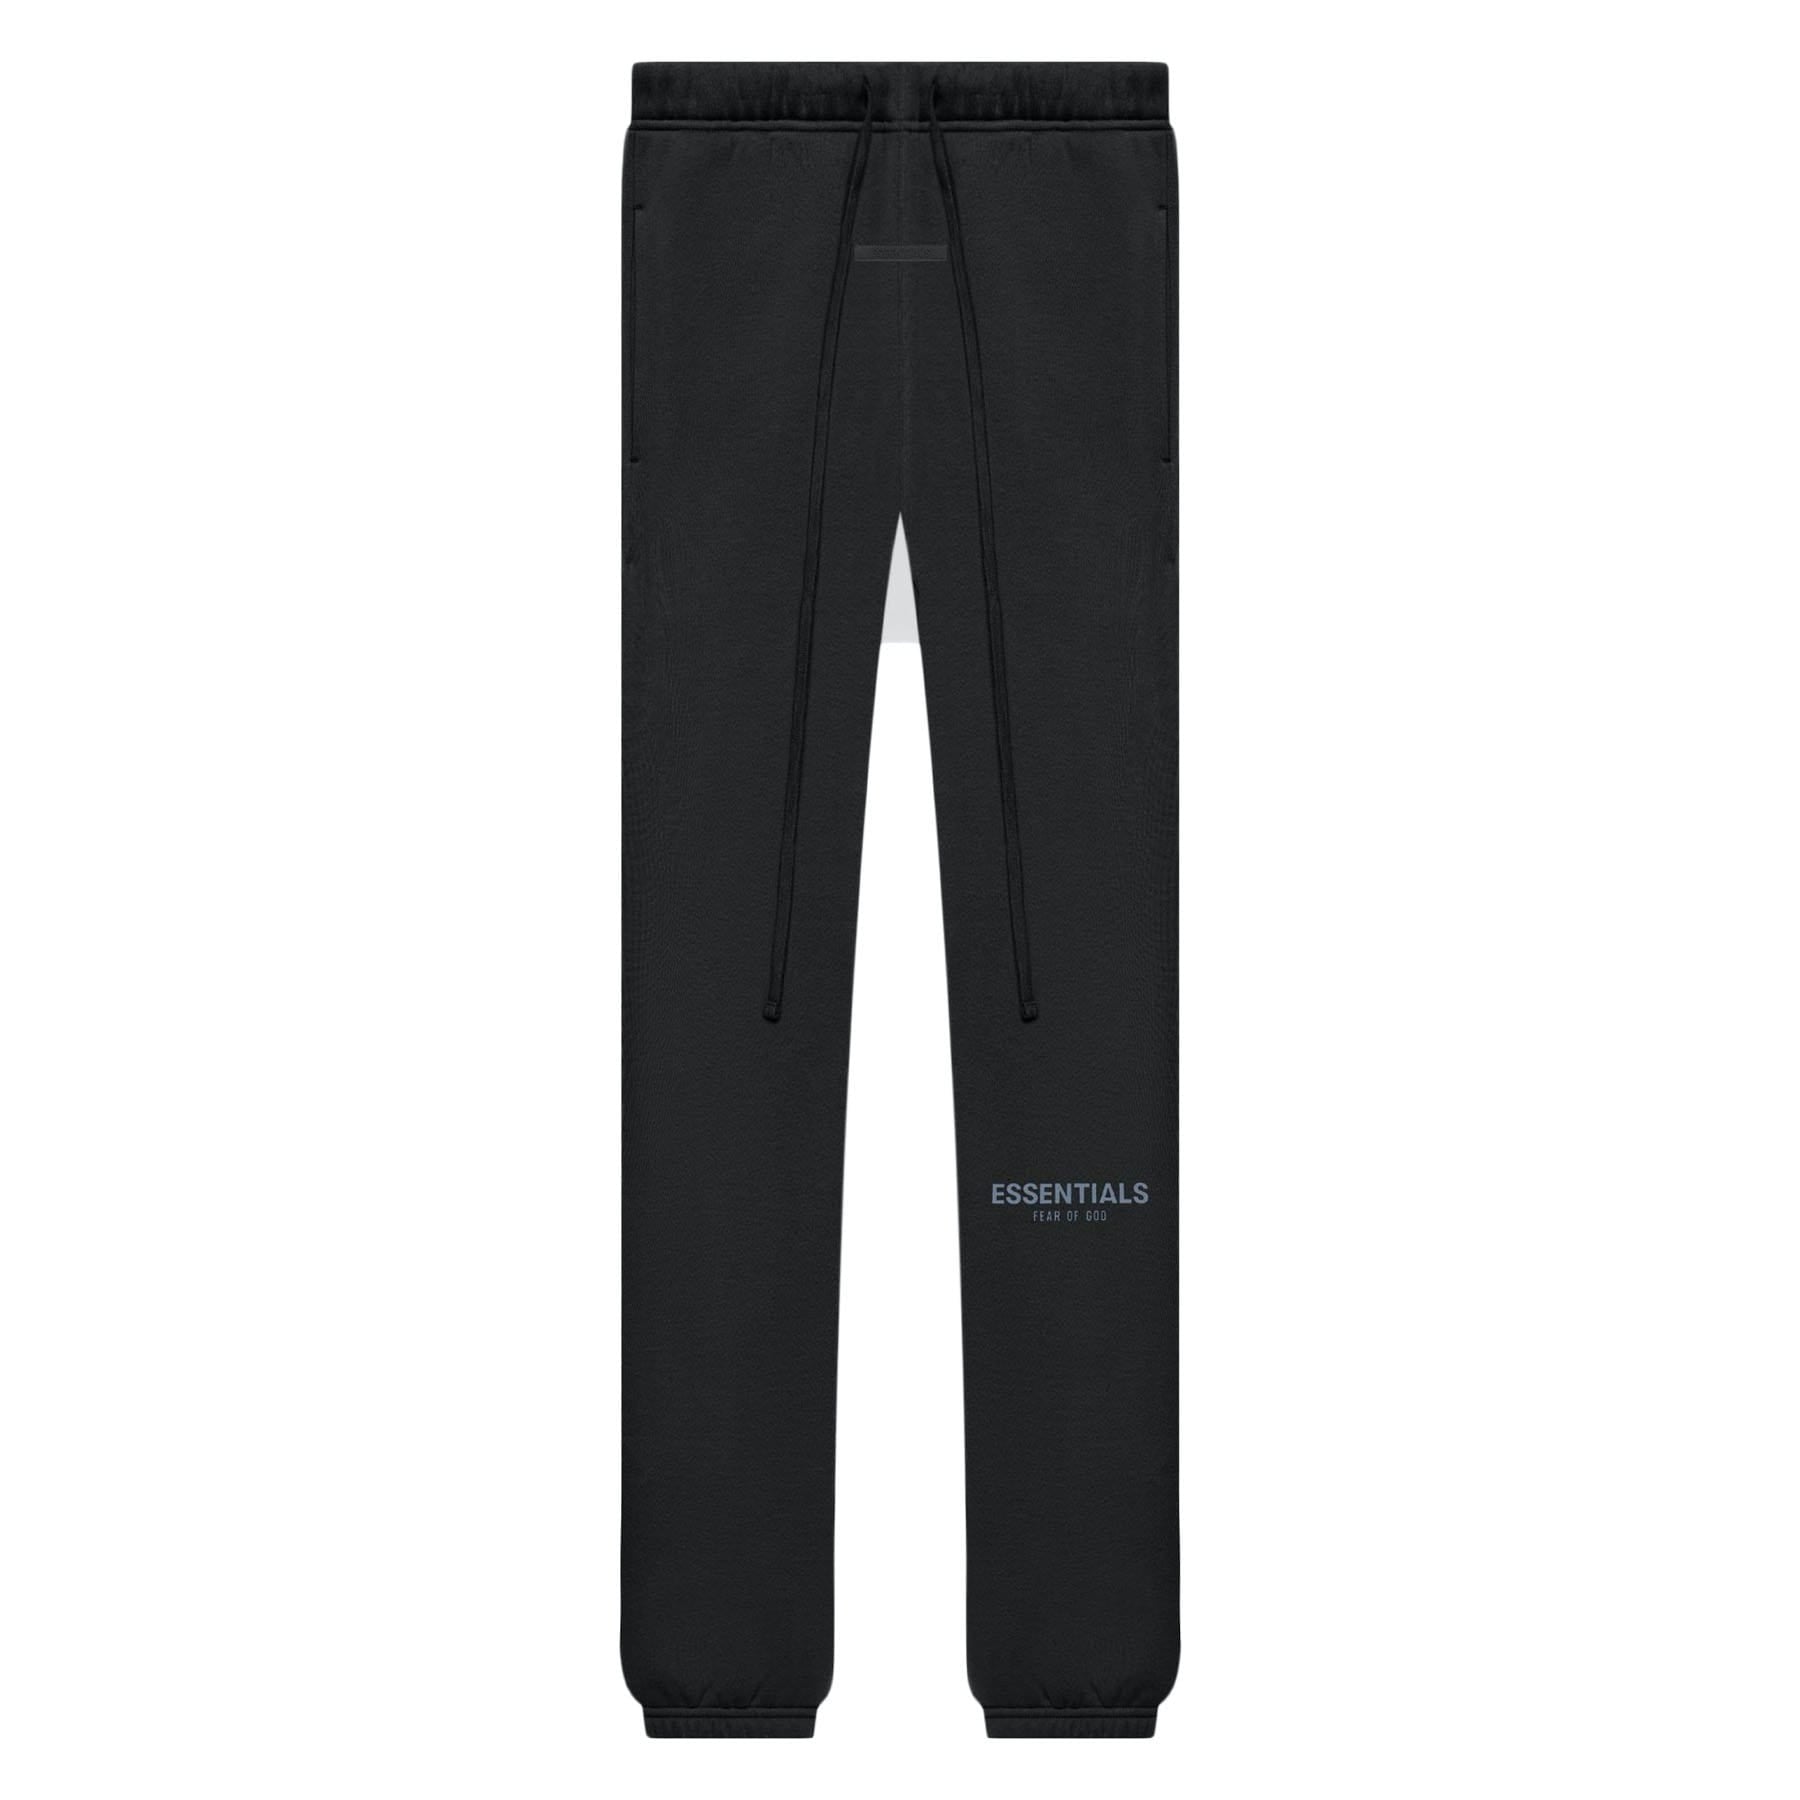 FEAR OF GOD ESSENTIALS SWEATPANTS (SS21) BLACK/STRETCH LIMO | Available?